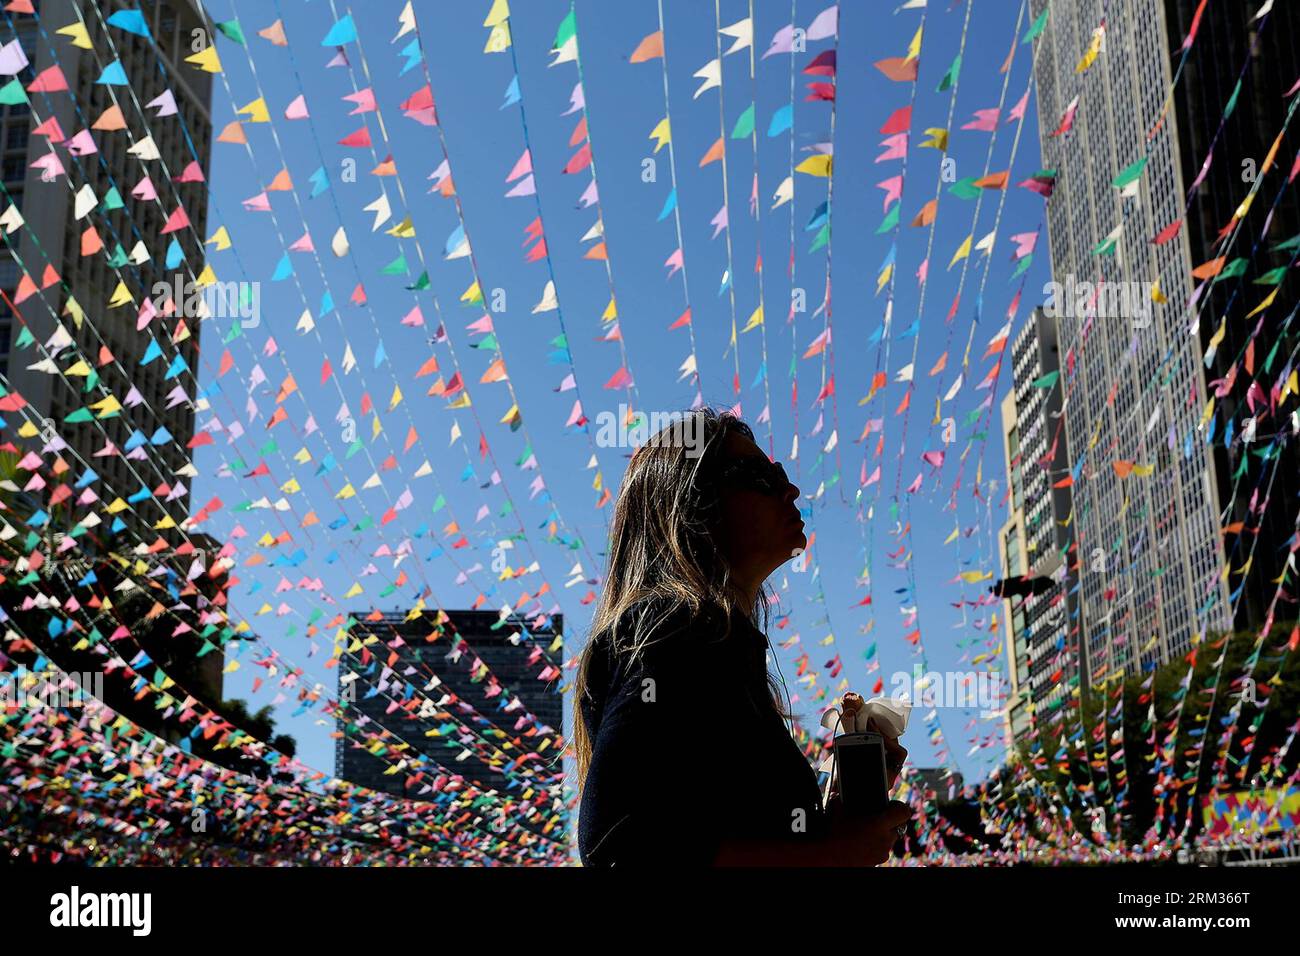 Bildnummer: 60050275  Datum: 07.07.2013  Copyright: imago/Xinhua A woman participates in the annual feast Festa Junina (June Festival), that is celebrated in the beginning of the Brazilian winter, in downtown Sao Paulo, Brazil, on July 7, 2013. The Junina Feast, which was introduced by the Portuguese during the colonial period, is celebrated during the month of June nationwide both in Brazil and Portugal with different religious festivities. (Xinhua/Rahel Patrasso) (rt) (sp) BRAZIL-SAO PAULO-SOCIETY-JUNE FESTIVAL PUBLICATIONxNOTxINxCHN Gesellschaft Fest Feier x0x xrj 2013 quer     60050275 Dat Stock Photo